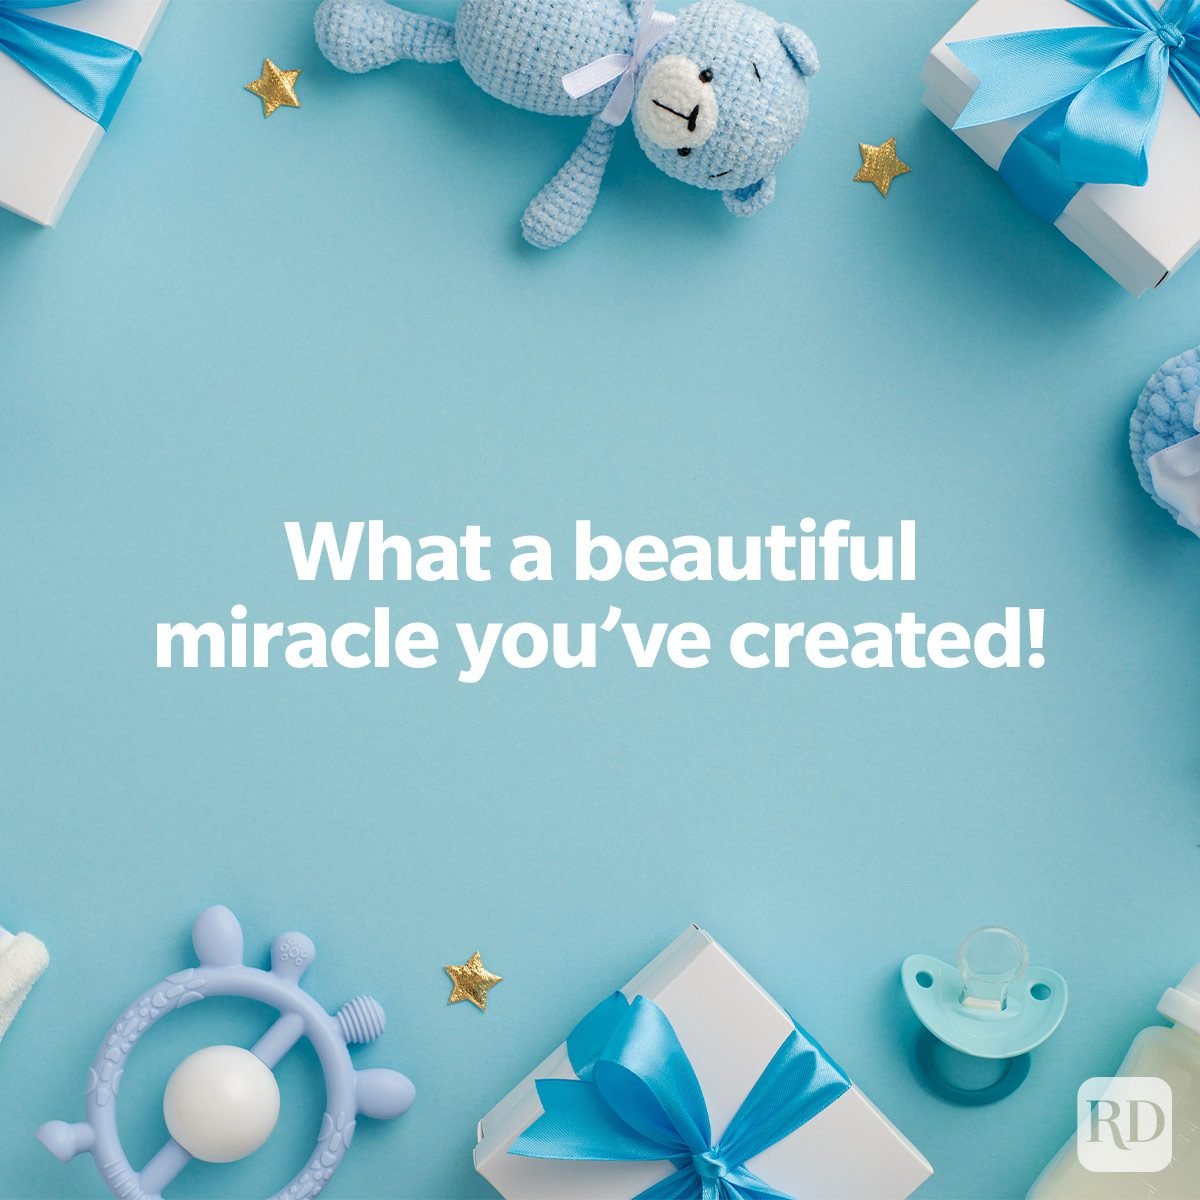 sweet baby wishes to send to expectant parents on baby toys and items background flat lay What a beautiful miracle you've created!